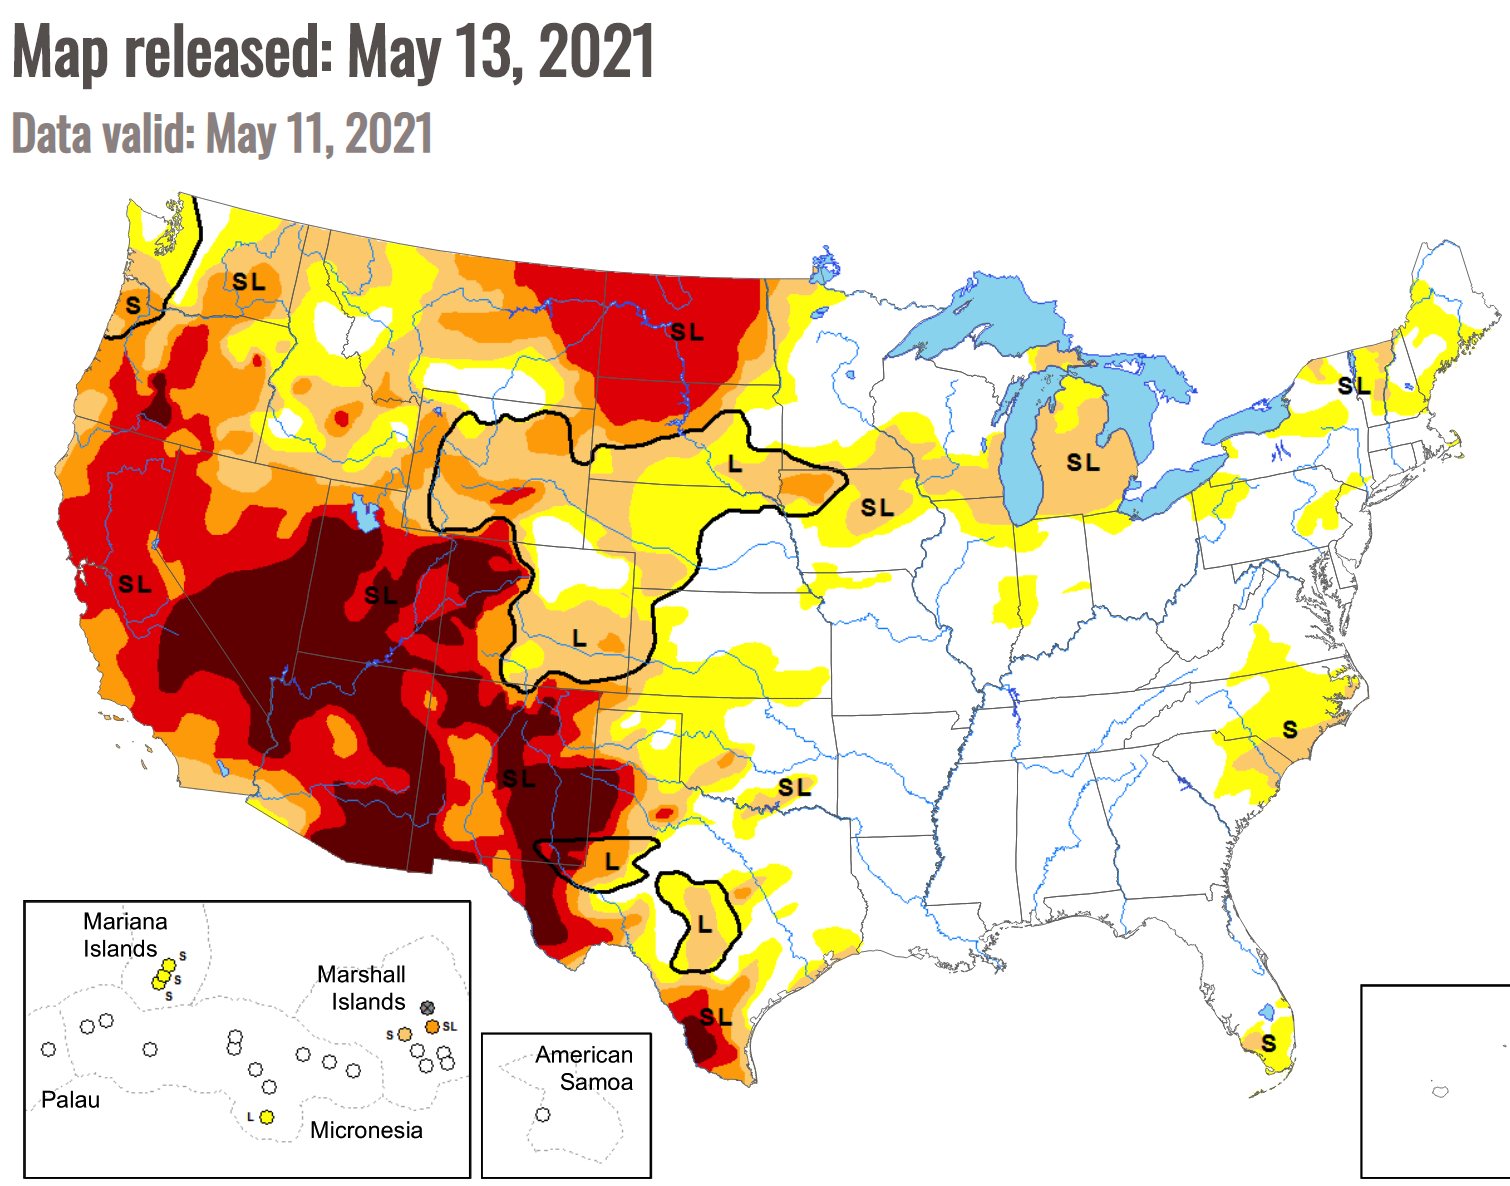 Megadrought Nightmare: No Water For Crops, Horrific Wildfires, Colossal Dust Storms And Draconian Water Restrictions May 16, 2021 by Michael Snyder